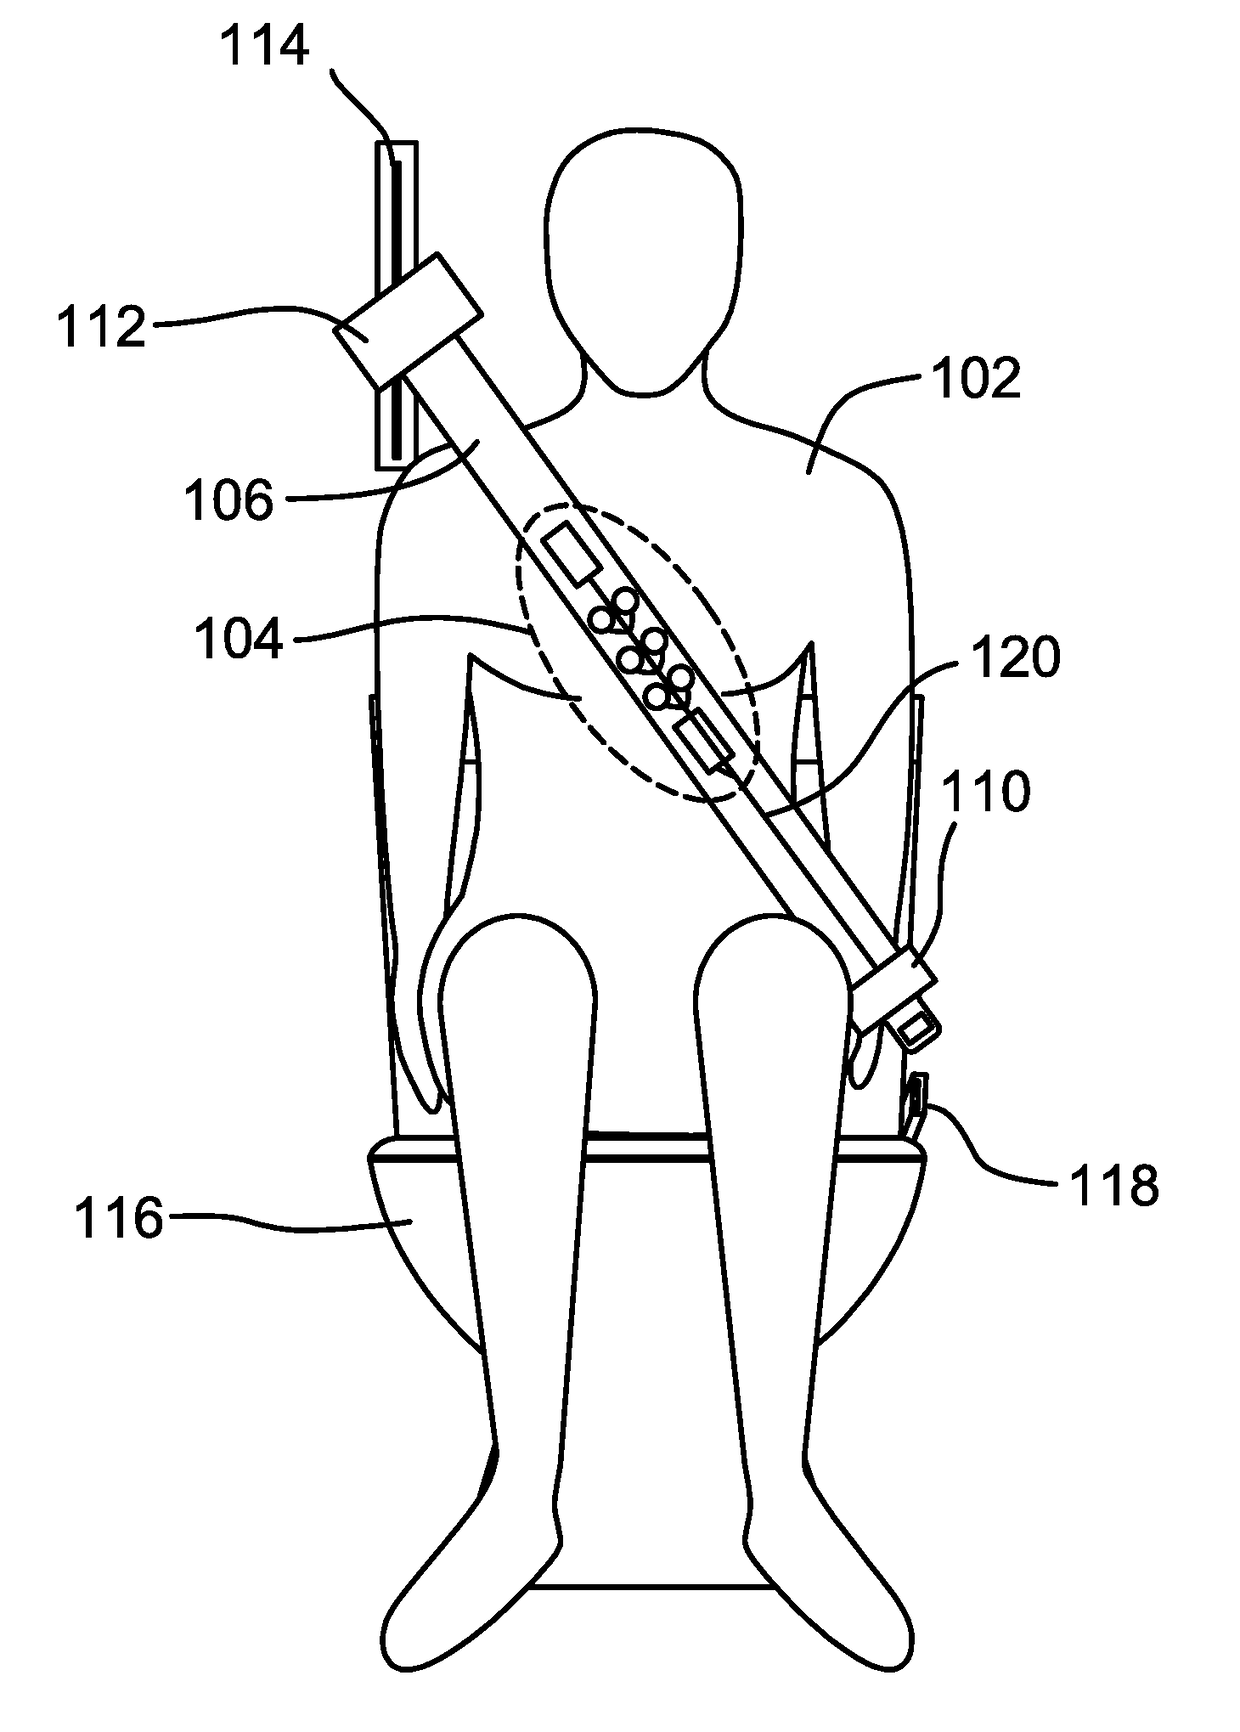 Method of Monitoring Health While Using a Toilet